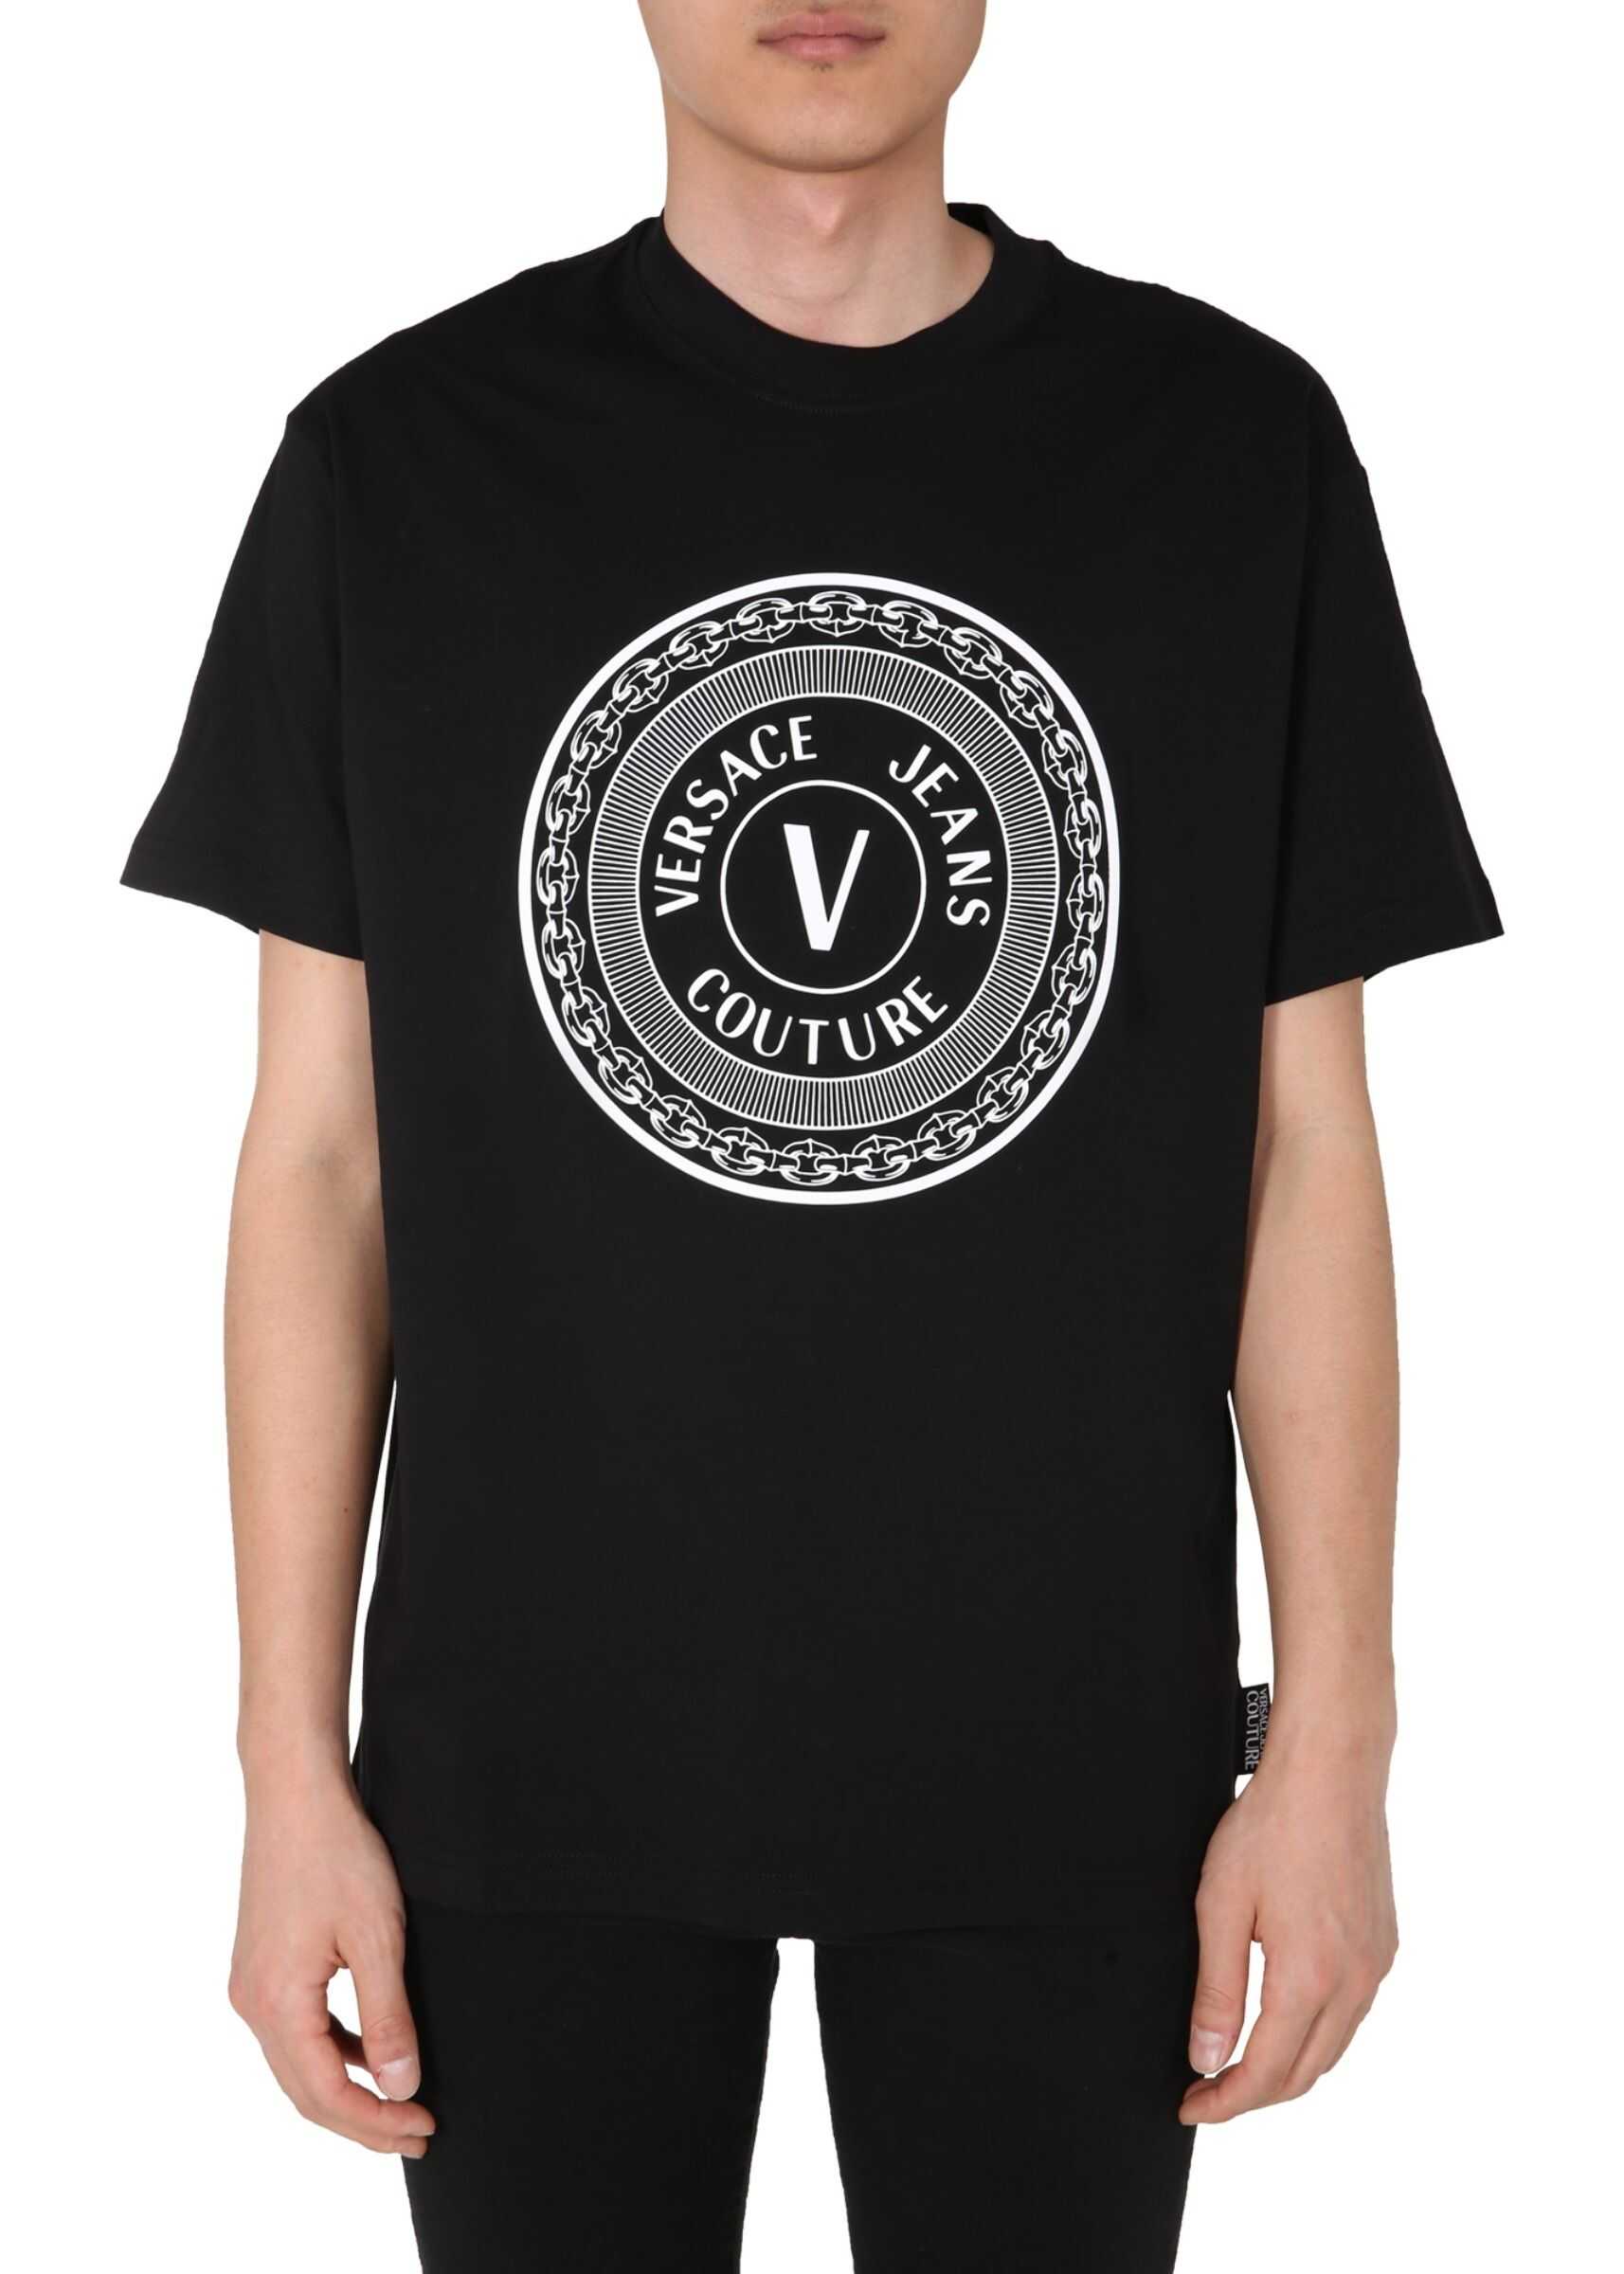 Versace Jeans Couture Round Neck T-Shirt BLACK